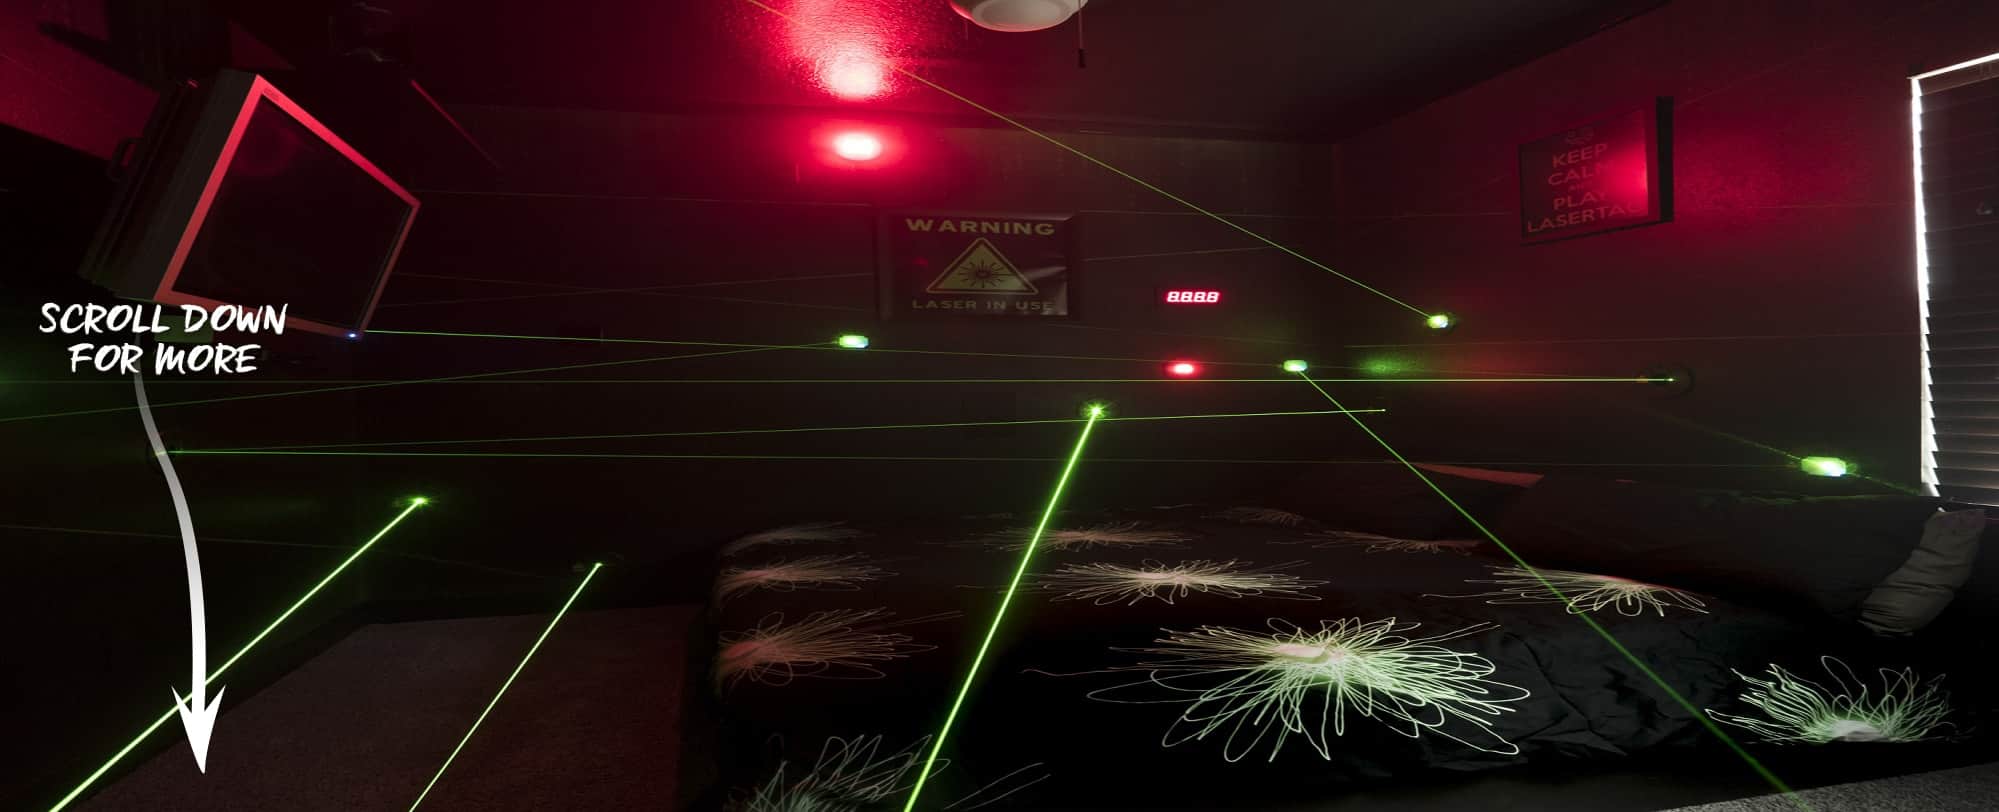 Laser Maze at The Great Escape Lakeside Mega Vacation Home Rental